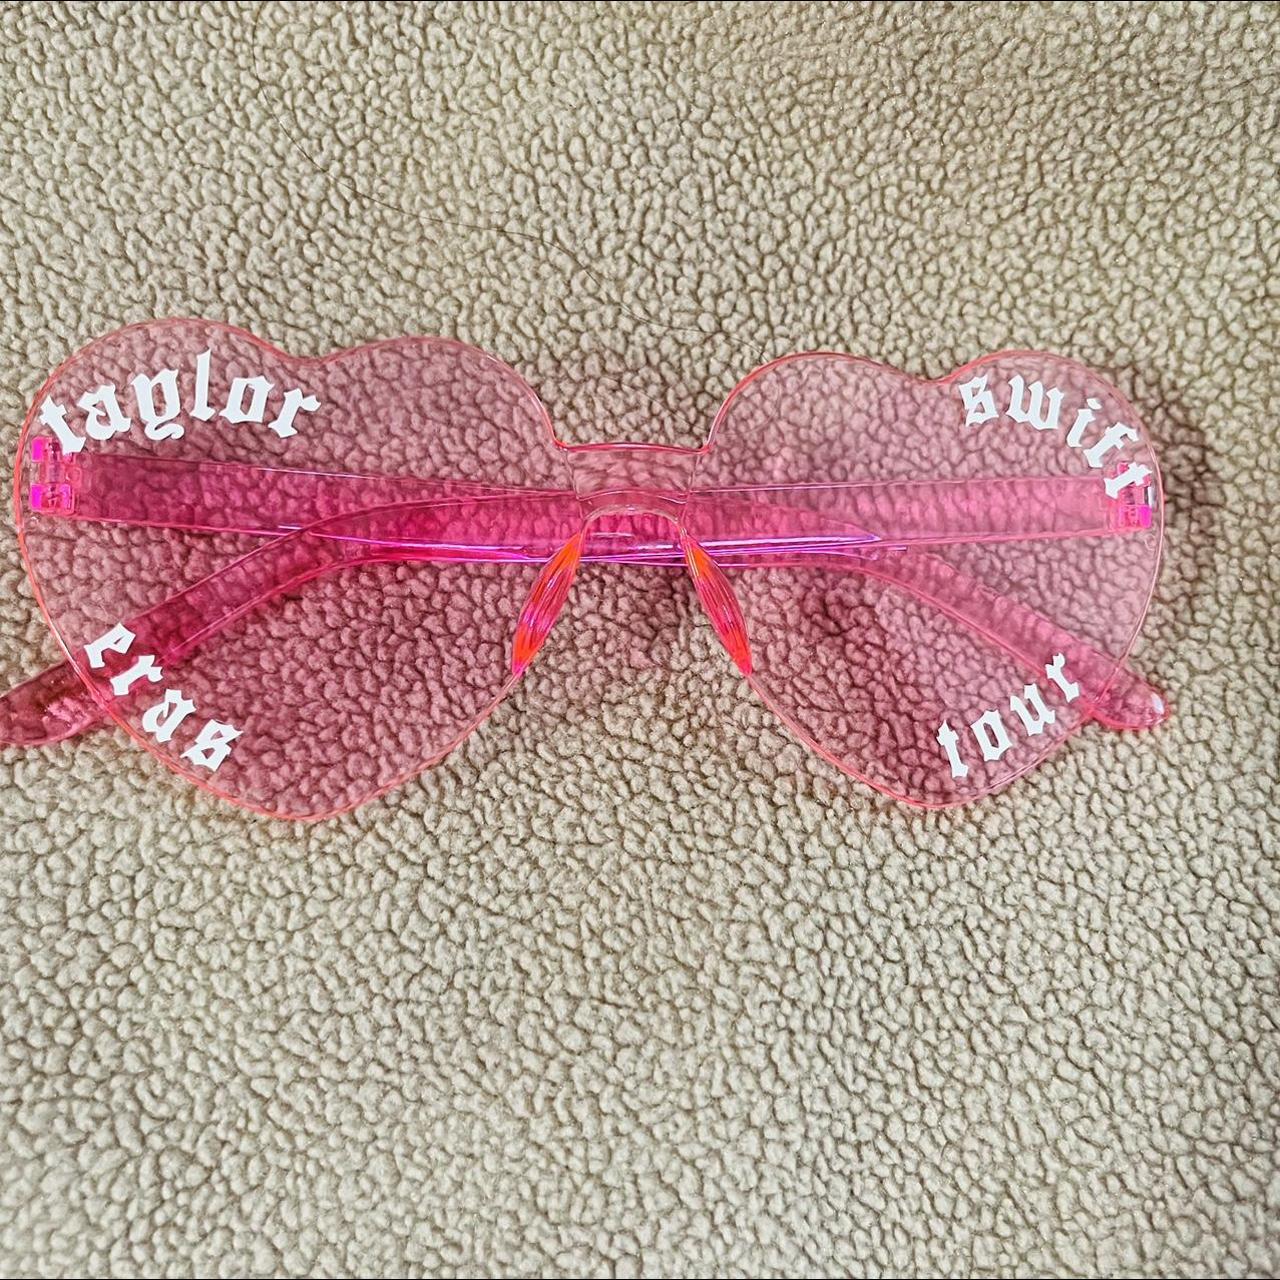 Taylor Swift Lover You Need To Calm Down Yellow Heart Sunglasses | eBay